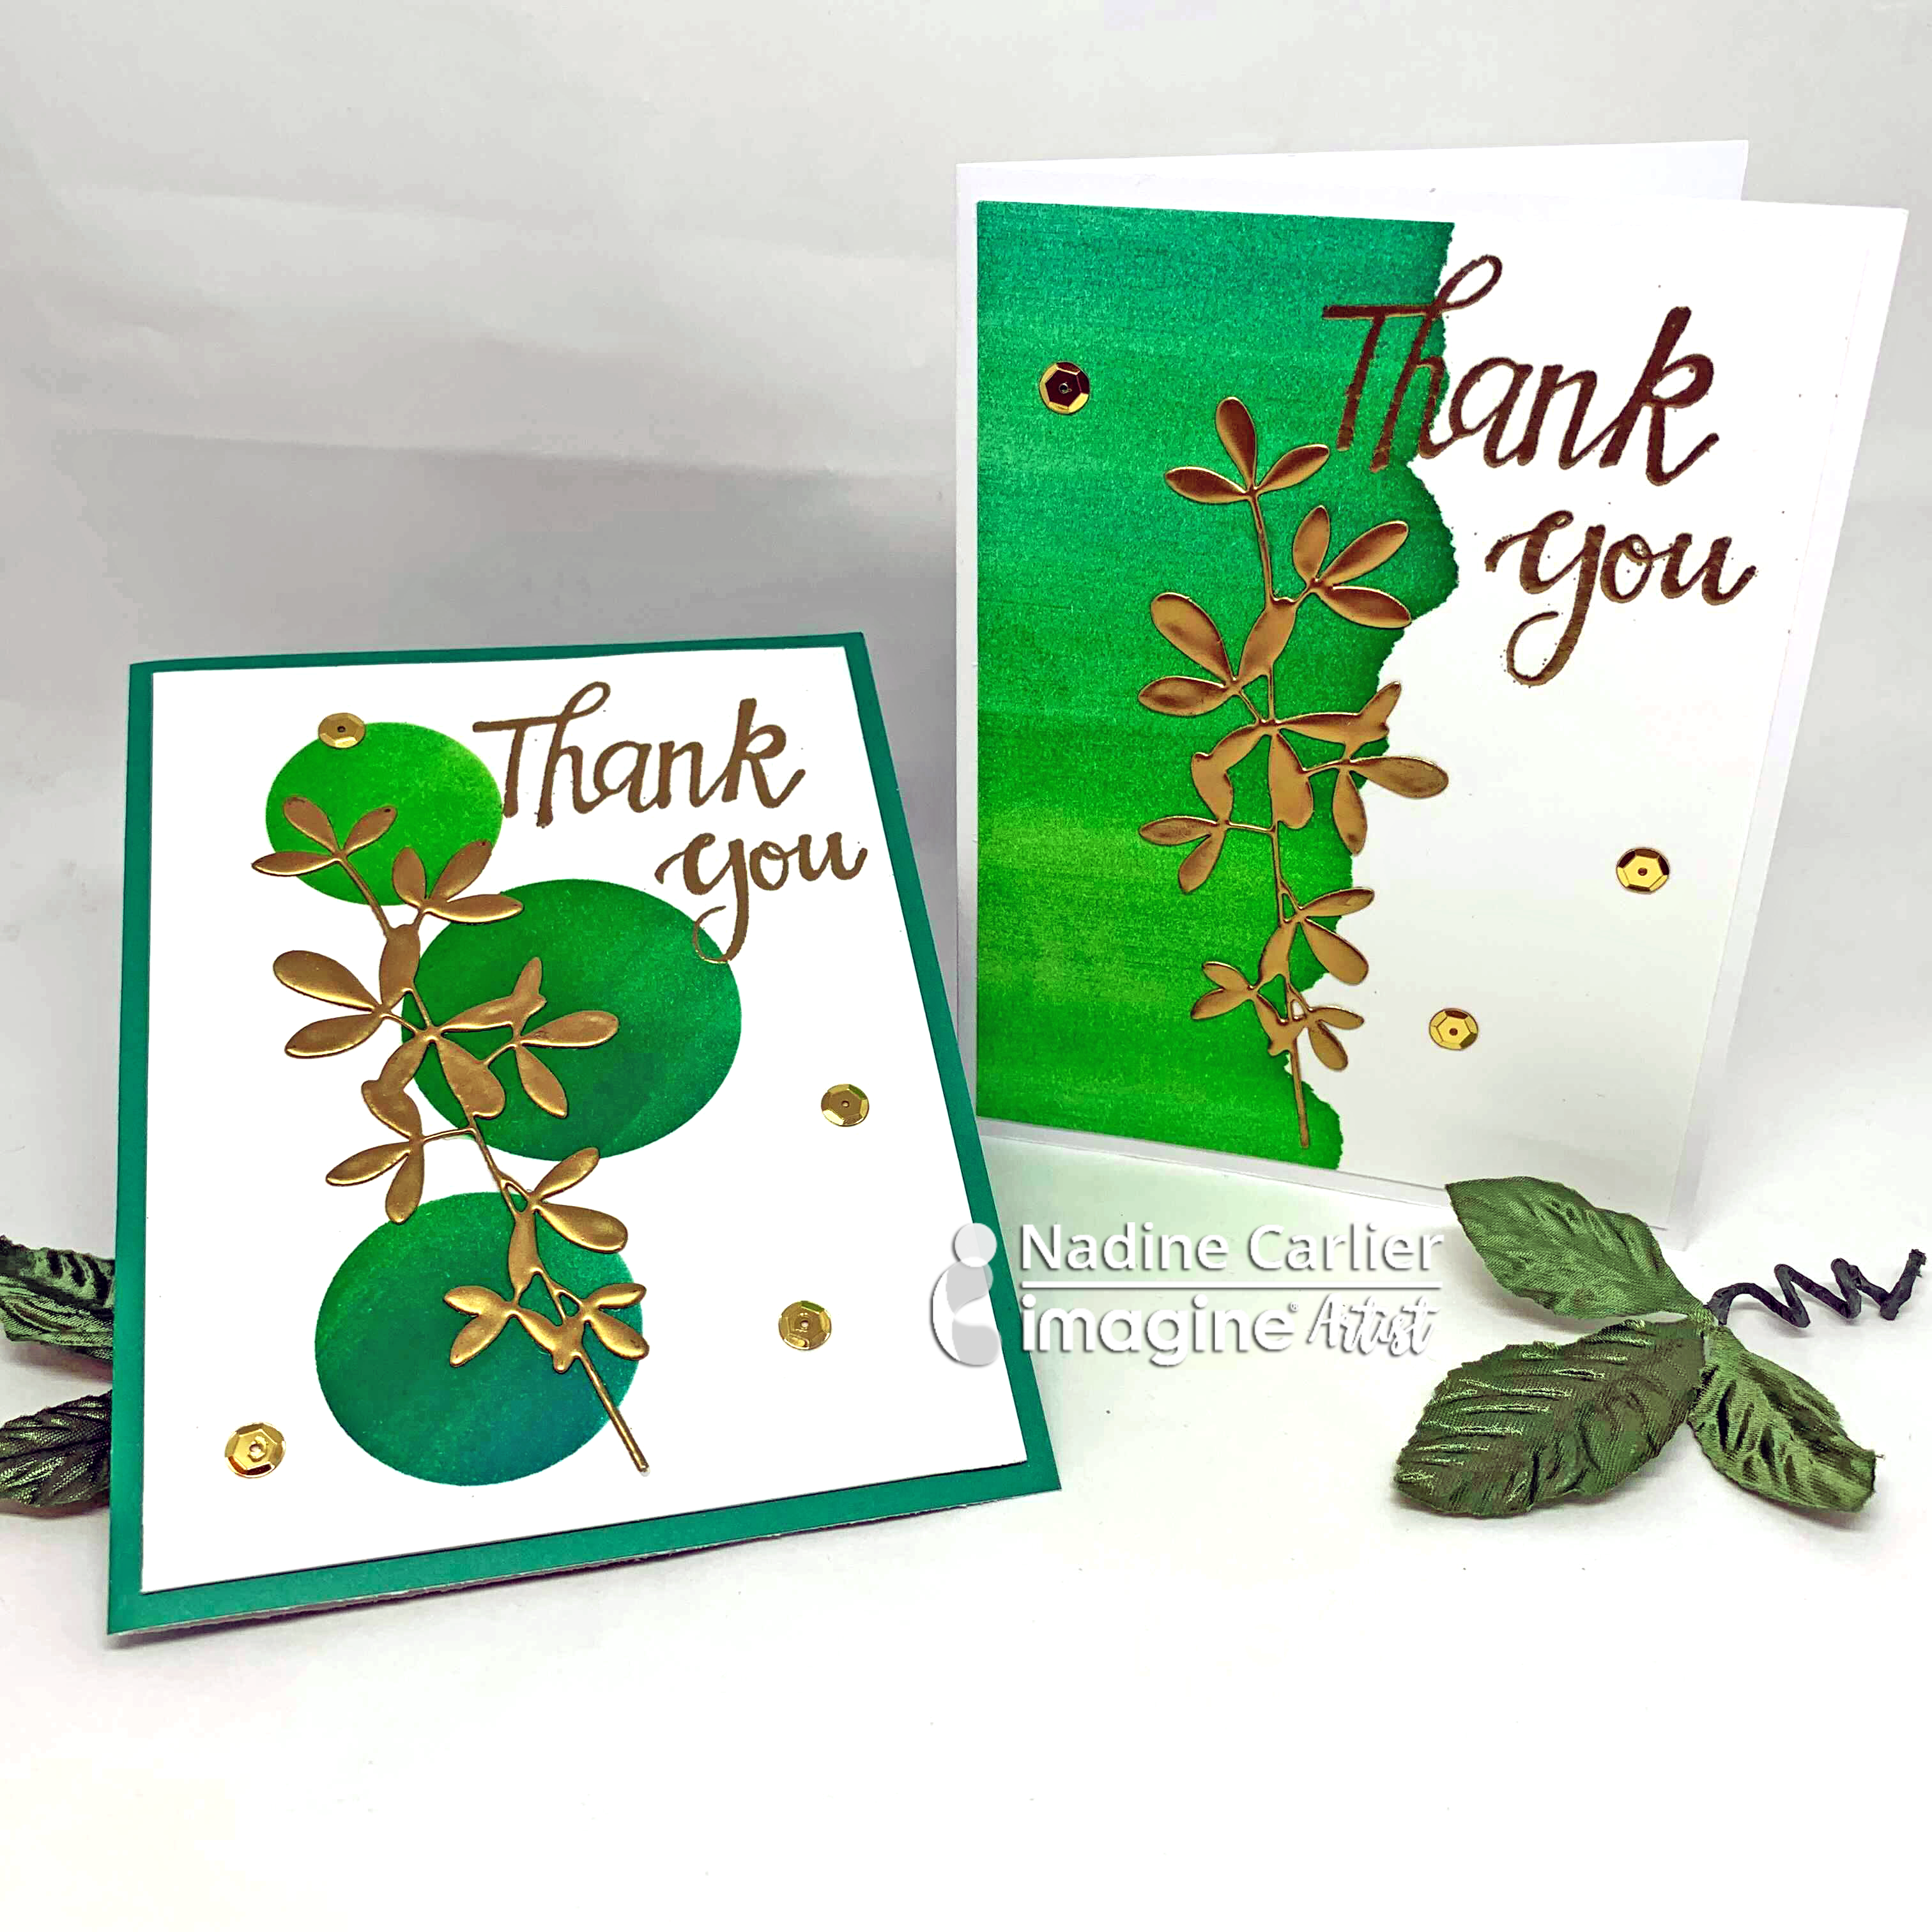 Handmade green greeting cards with an ombre effect made using masks and a Kaleidacolor ink pad.